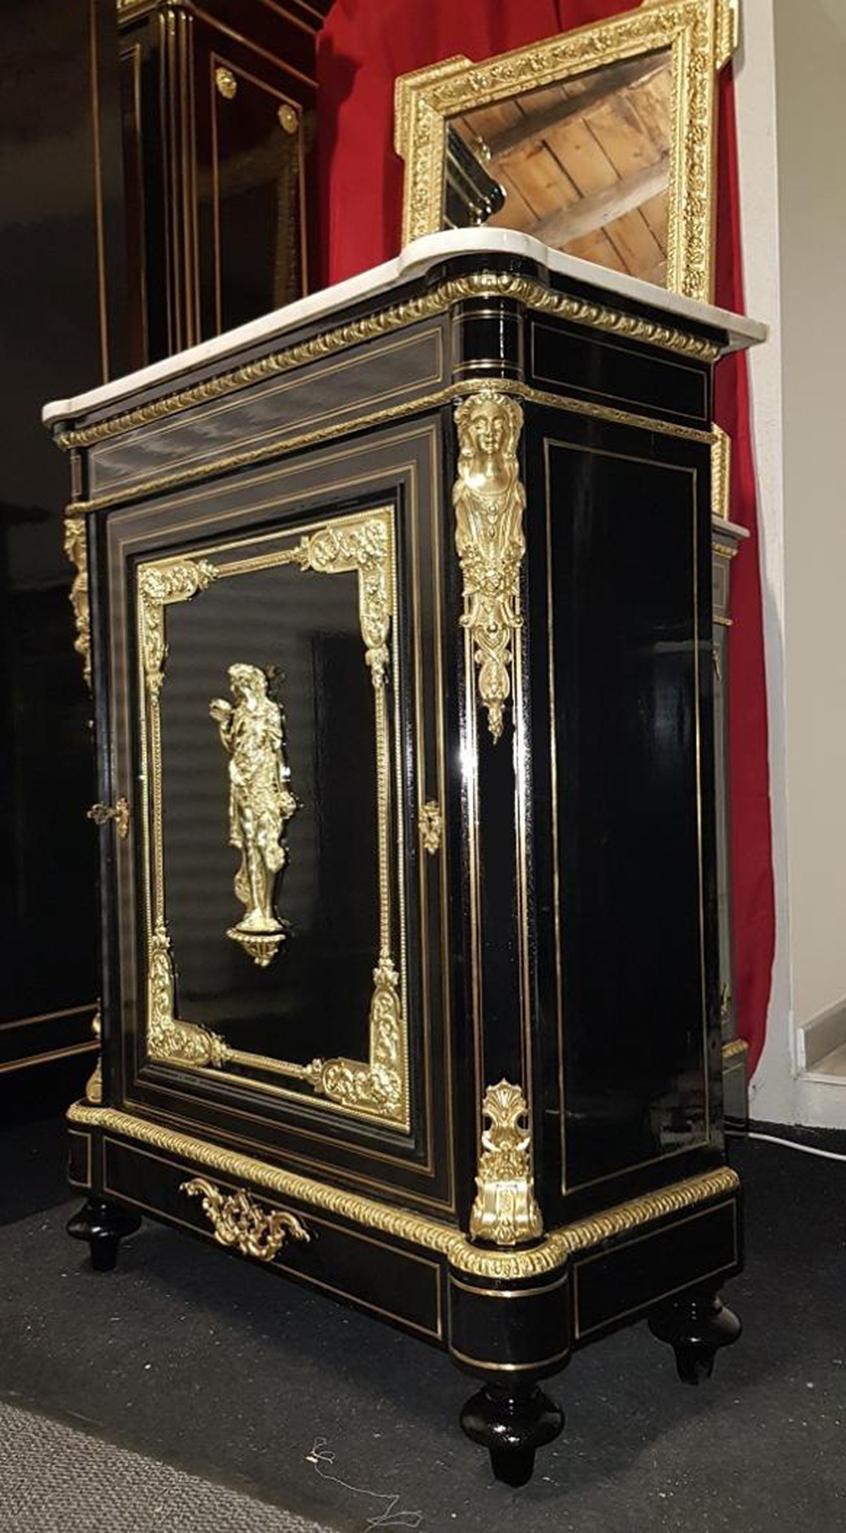 Marquetry Boulle cabinet with brass filets and an important ornamentation of gilt bronze. On the doors you will find a beautiful bronze representing Bacchus the God of the Fertility and Wine.
White Carrara marble top and the inside part is in